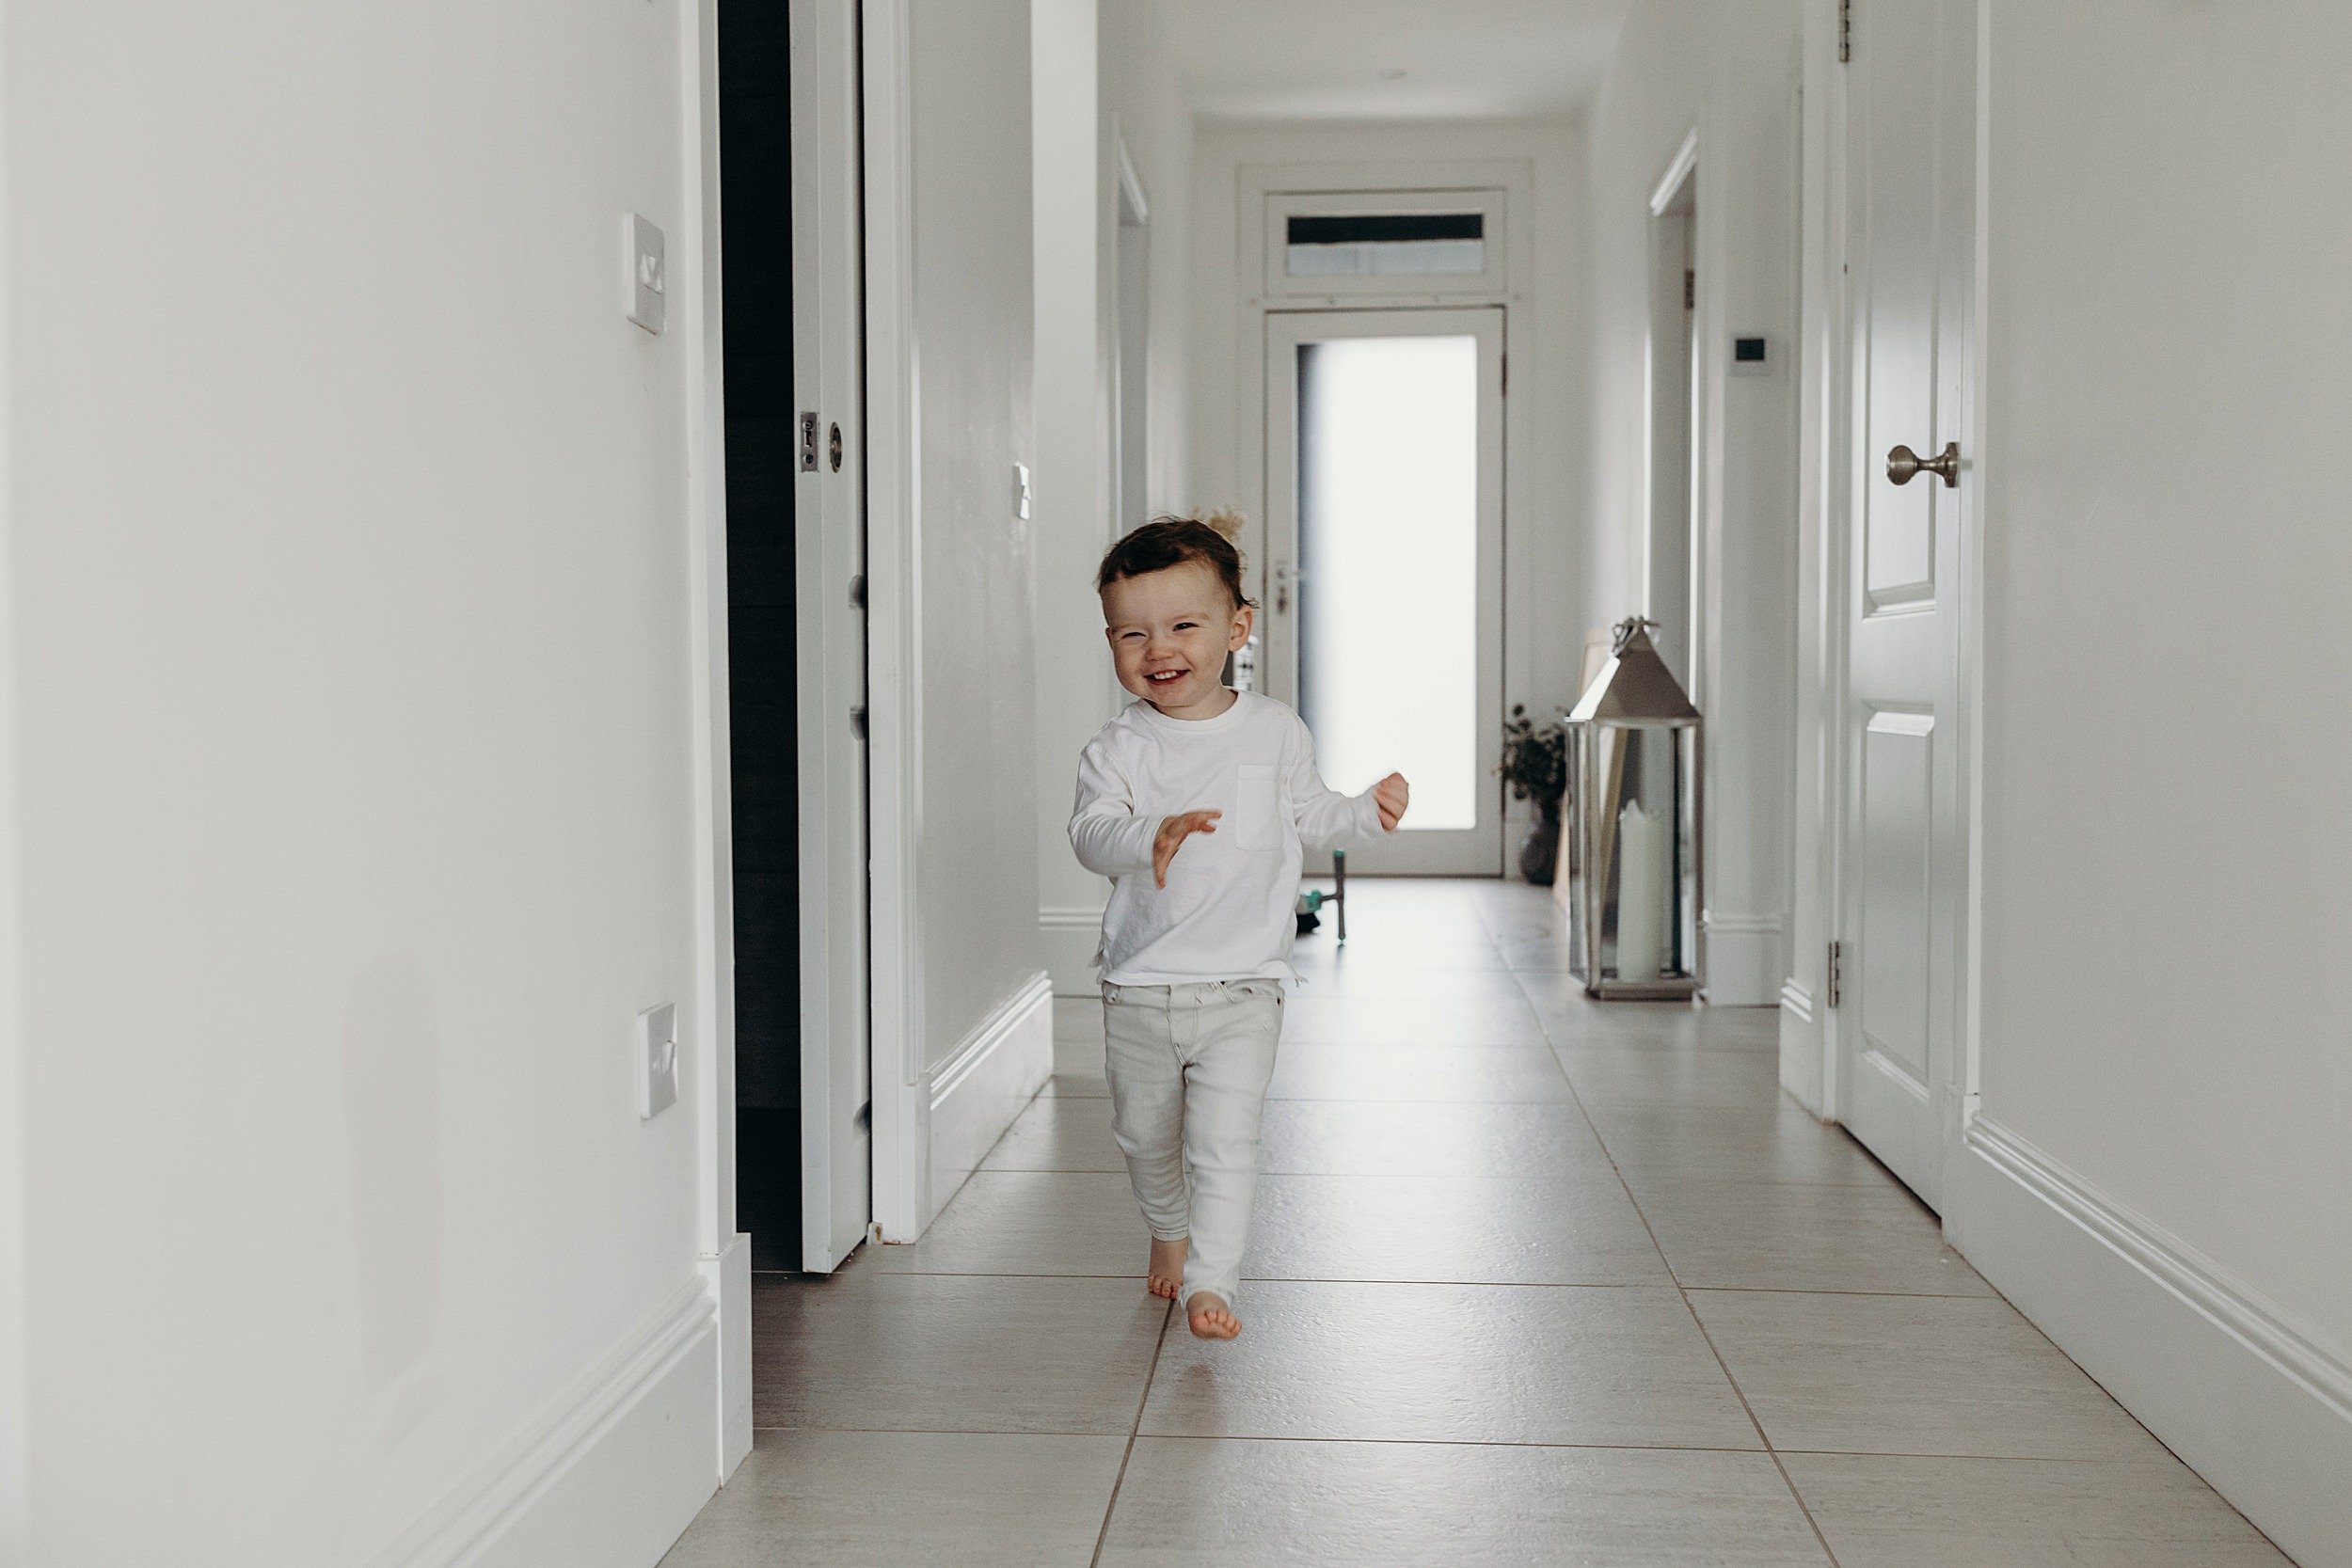 family photographer glasgow scotland captures toddler boy with red hair running in hallway laughing